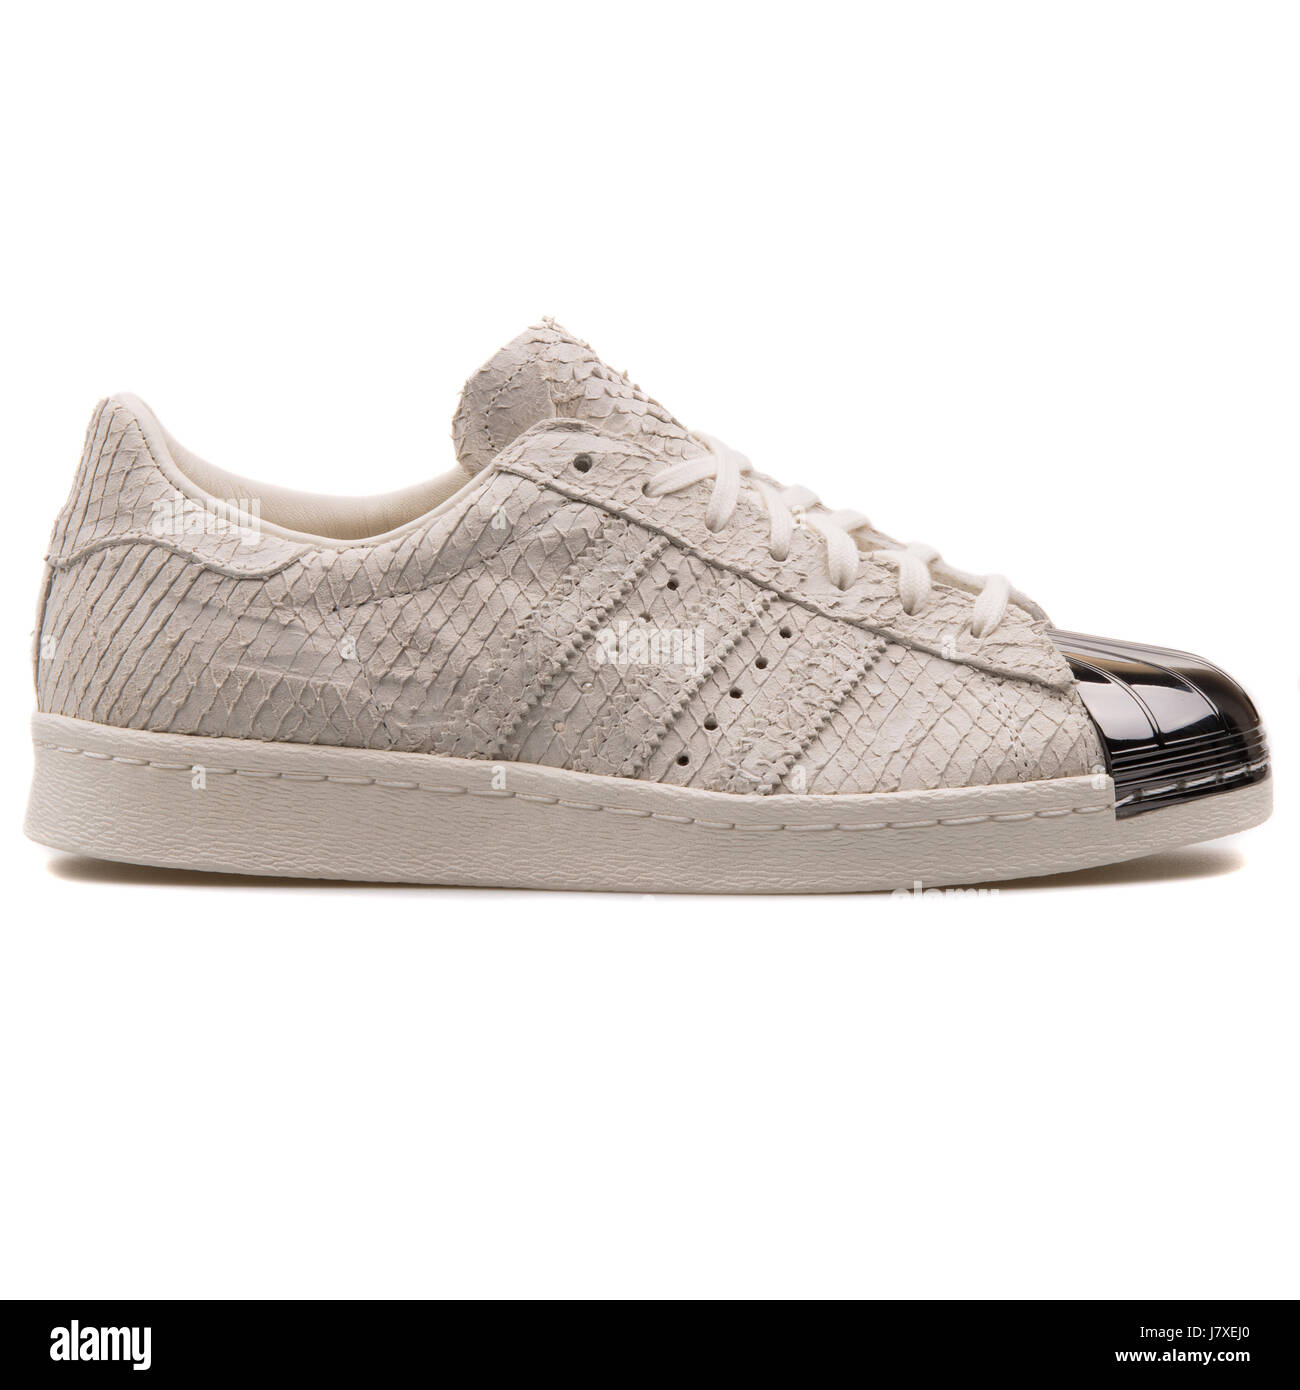 Adidas Superstar 80S Metal Toe W Women's Classic White Leather with Snake  Skin Pattern Sneakers - S82483 Stock Photo - Alamy